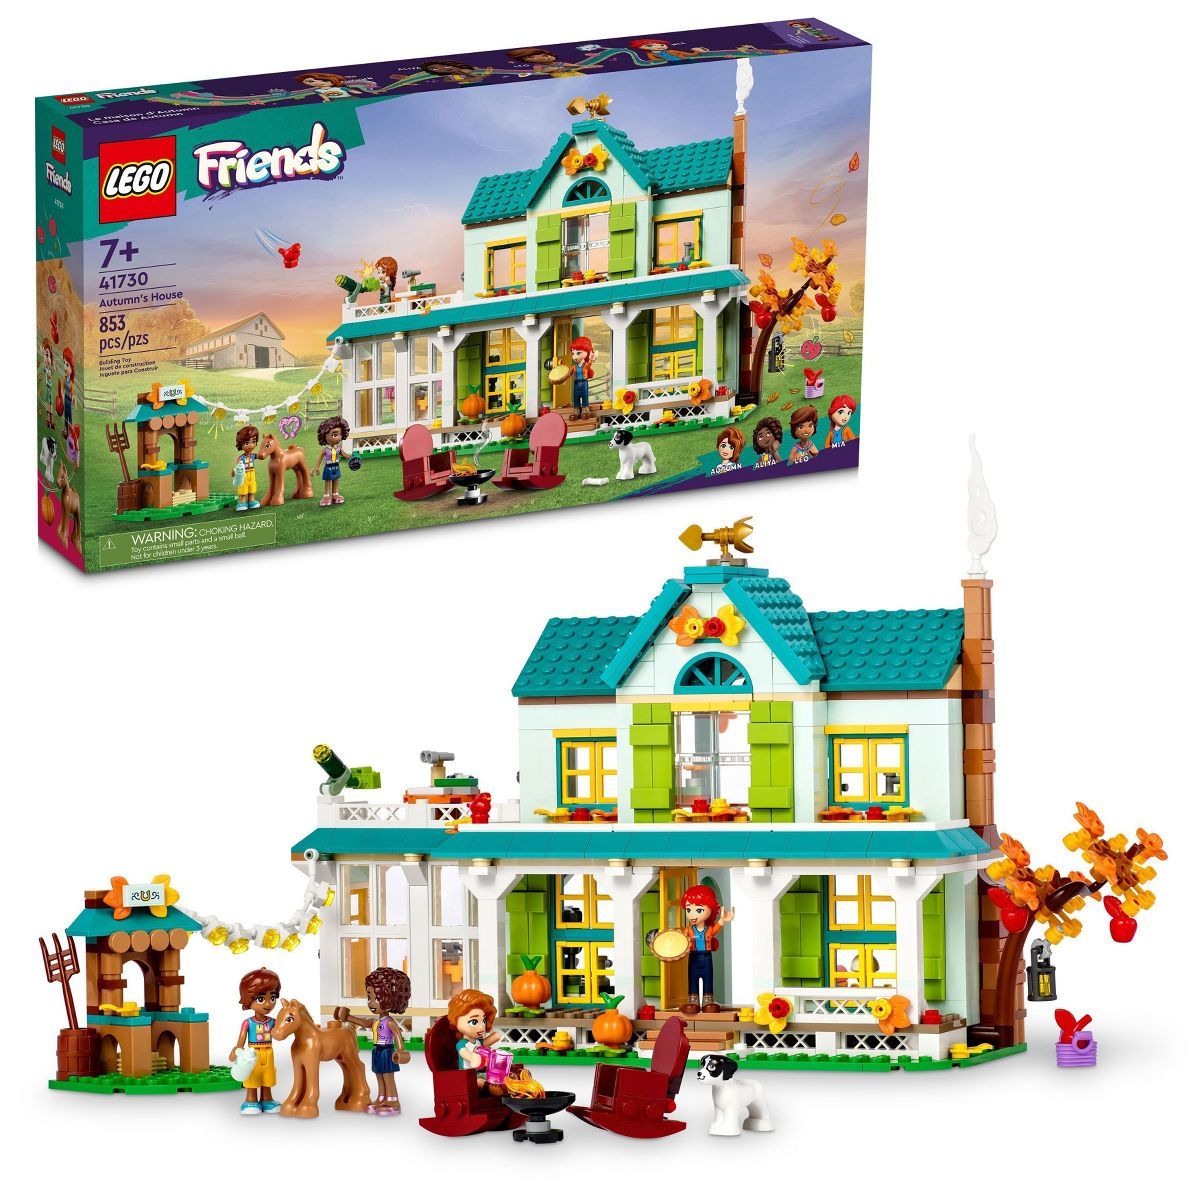 LEGO Friends Autumn's House, Dolls House Toy Playset 41730 | Target